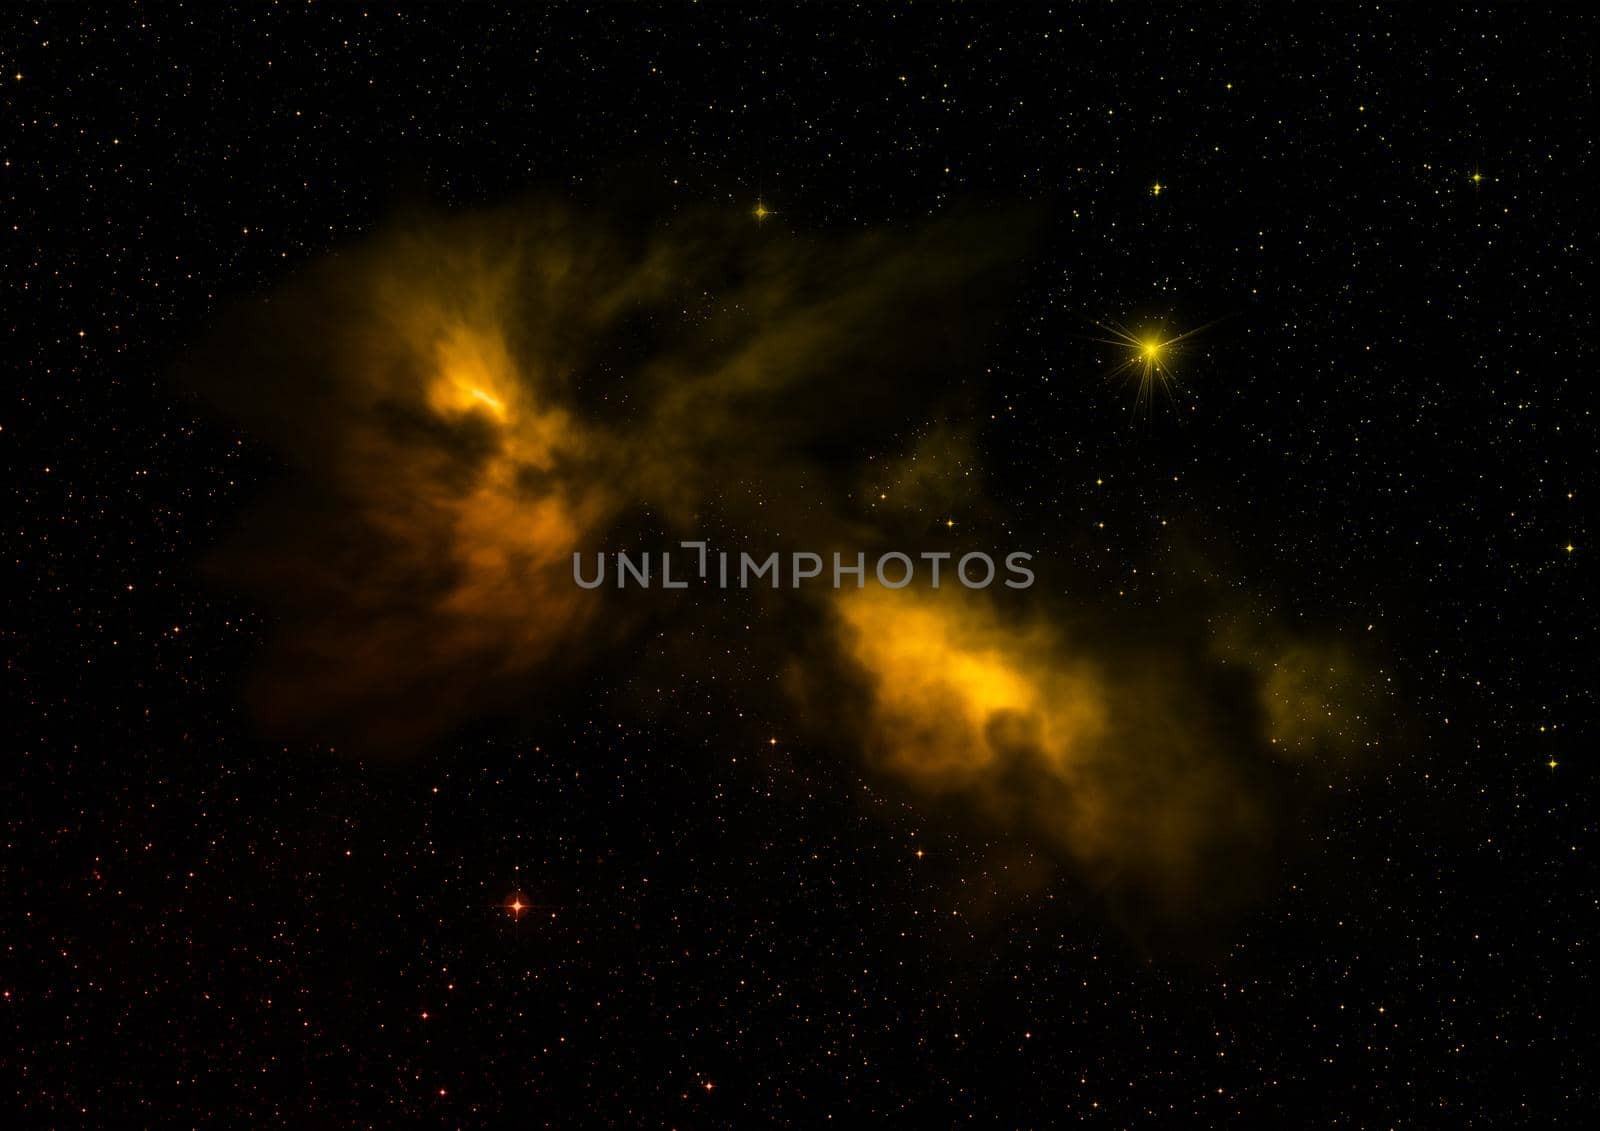 Being shone nebula and star field. 3D rendering by richter1910